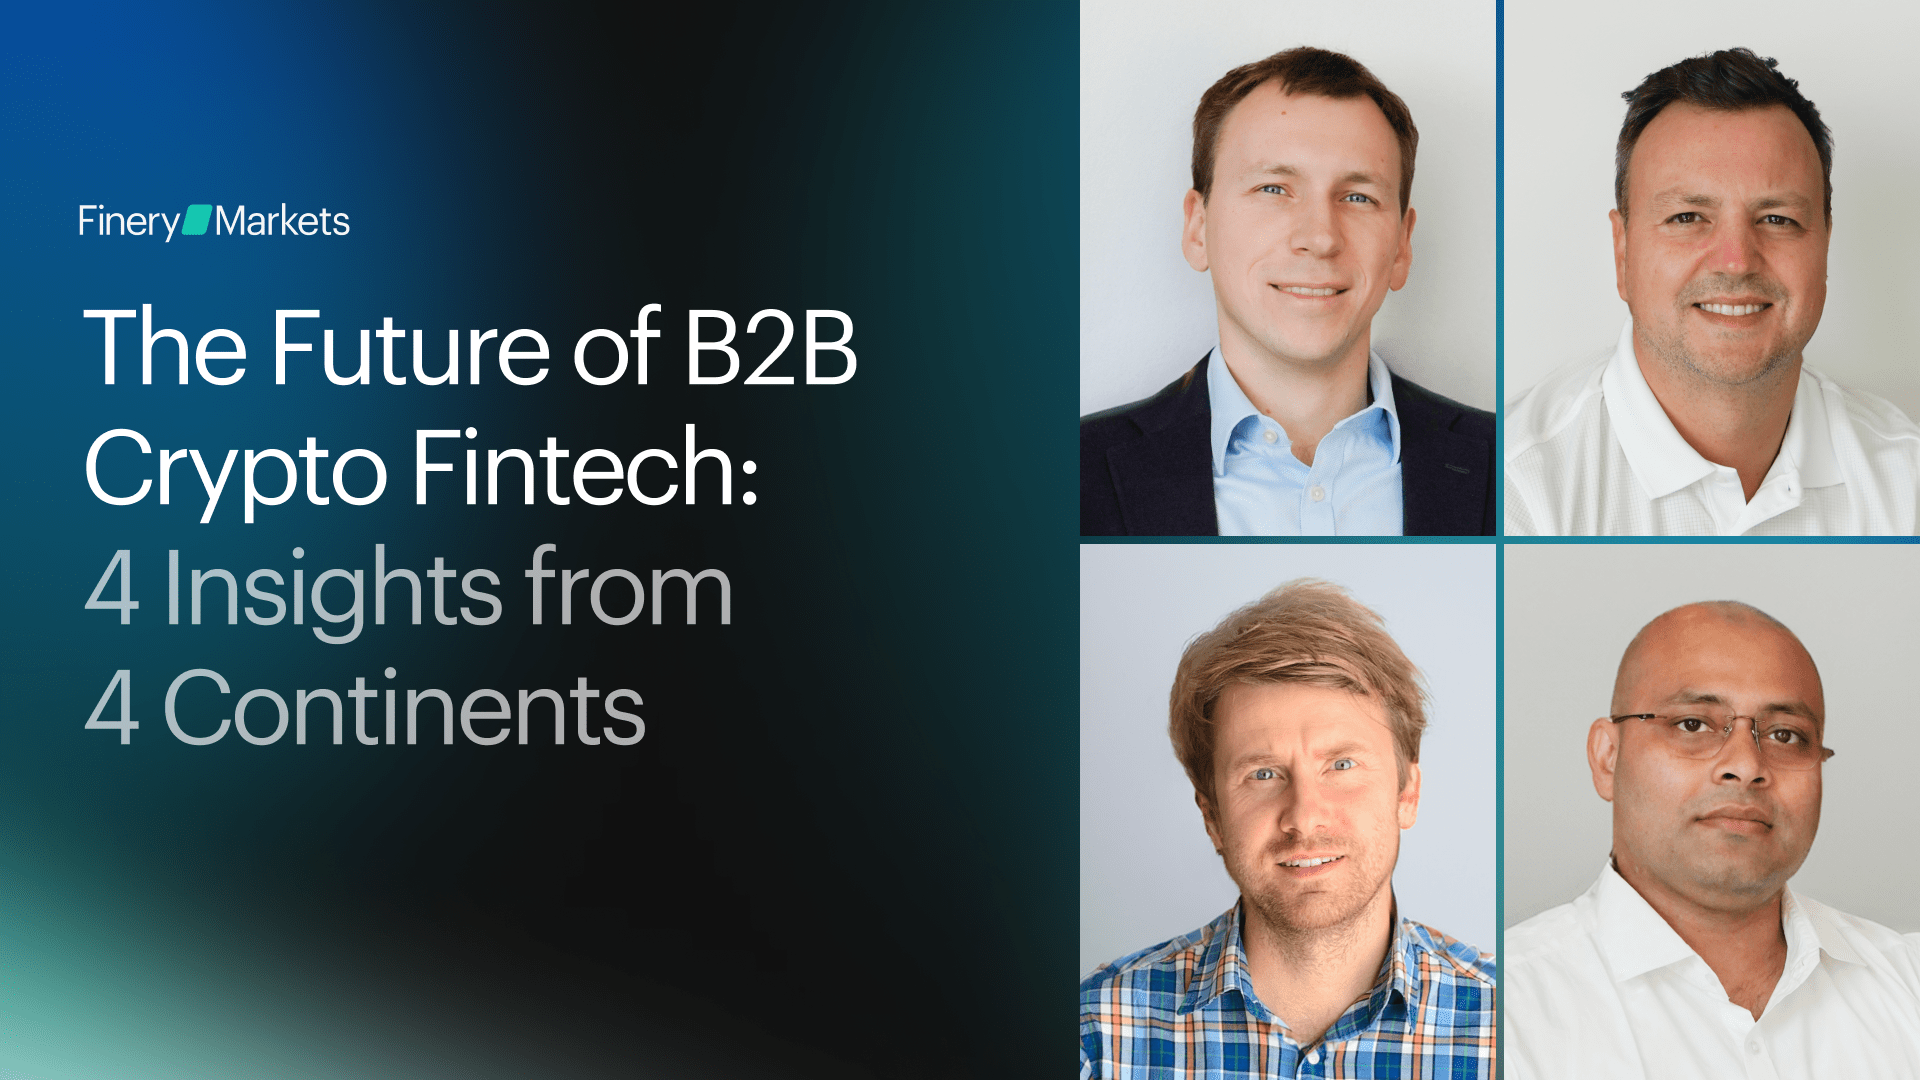 The Future of B2B Crypto Fintech: 4 Insights from 4 Continents